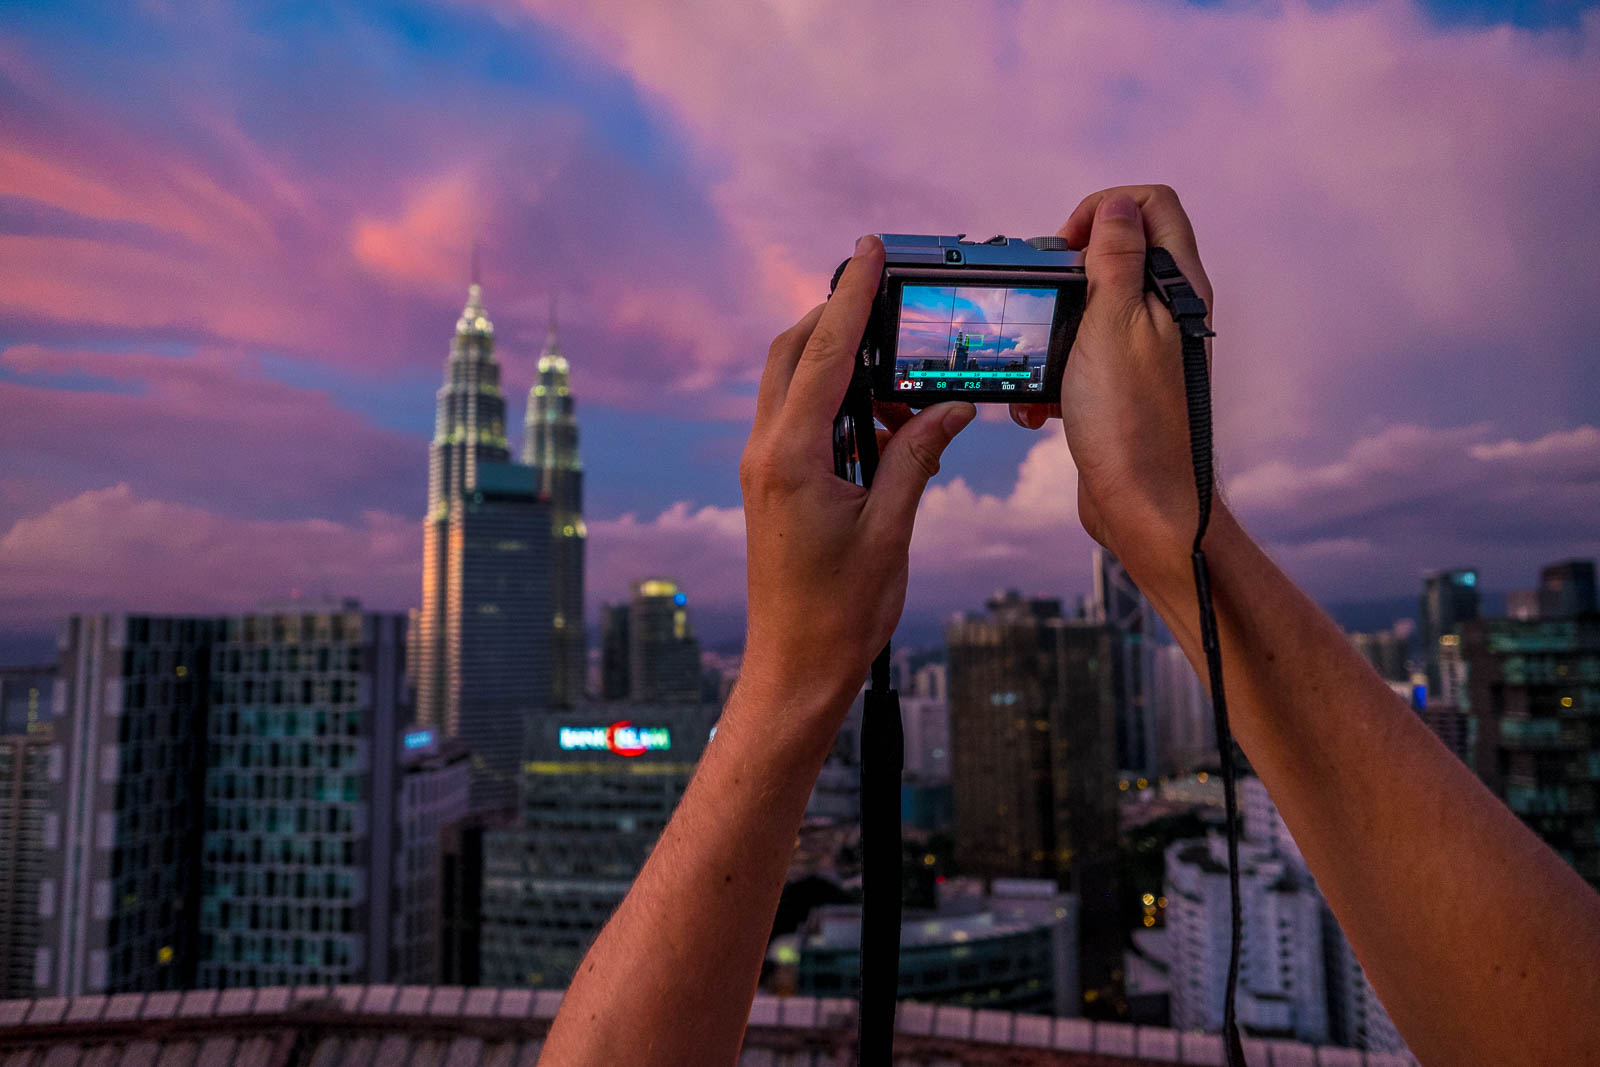 Taking a picuture of the Petronas Twin Towers in Kuala Lumpur during sunset